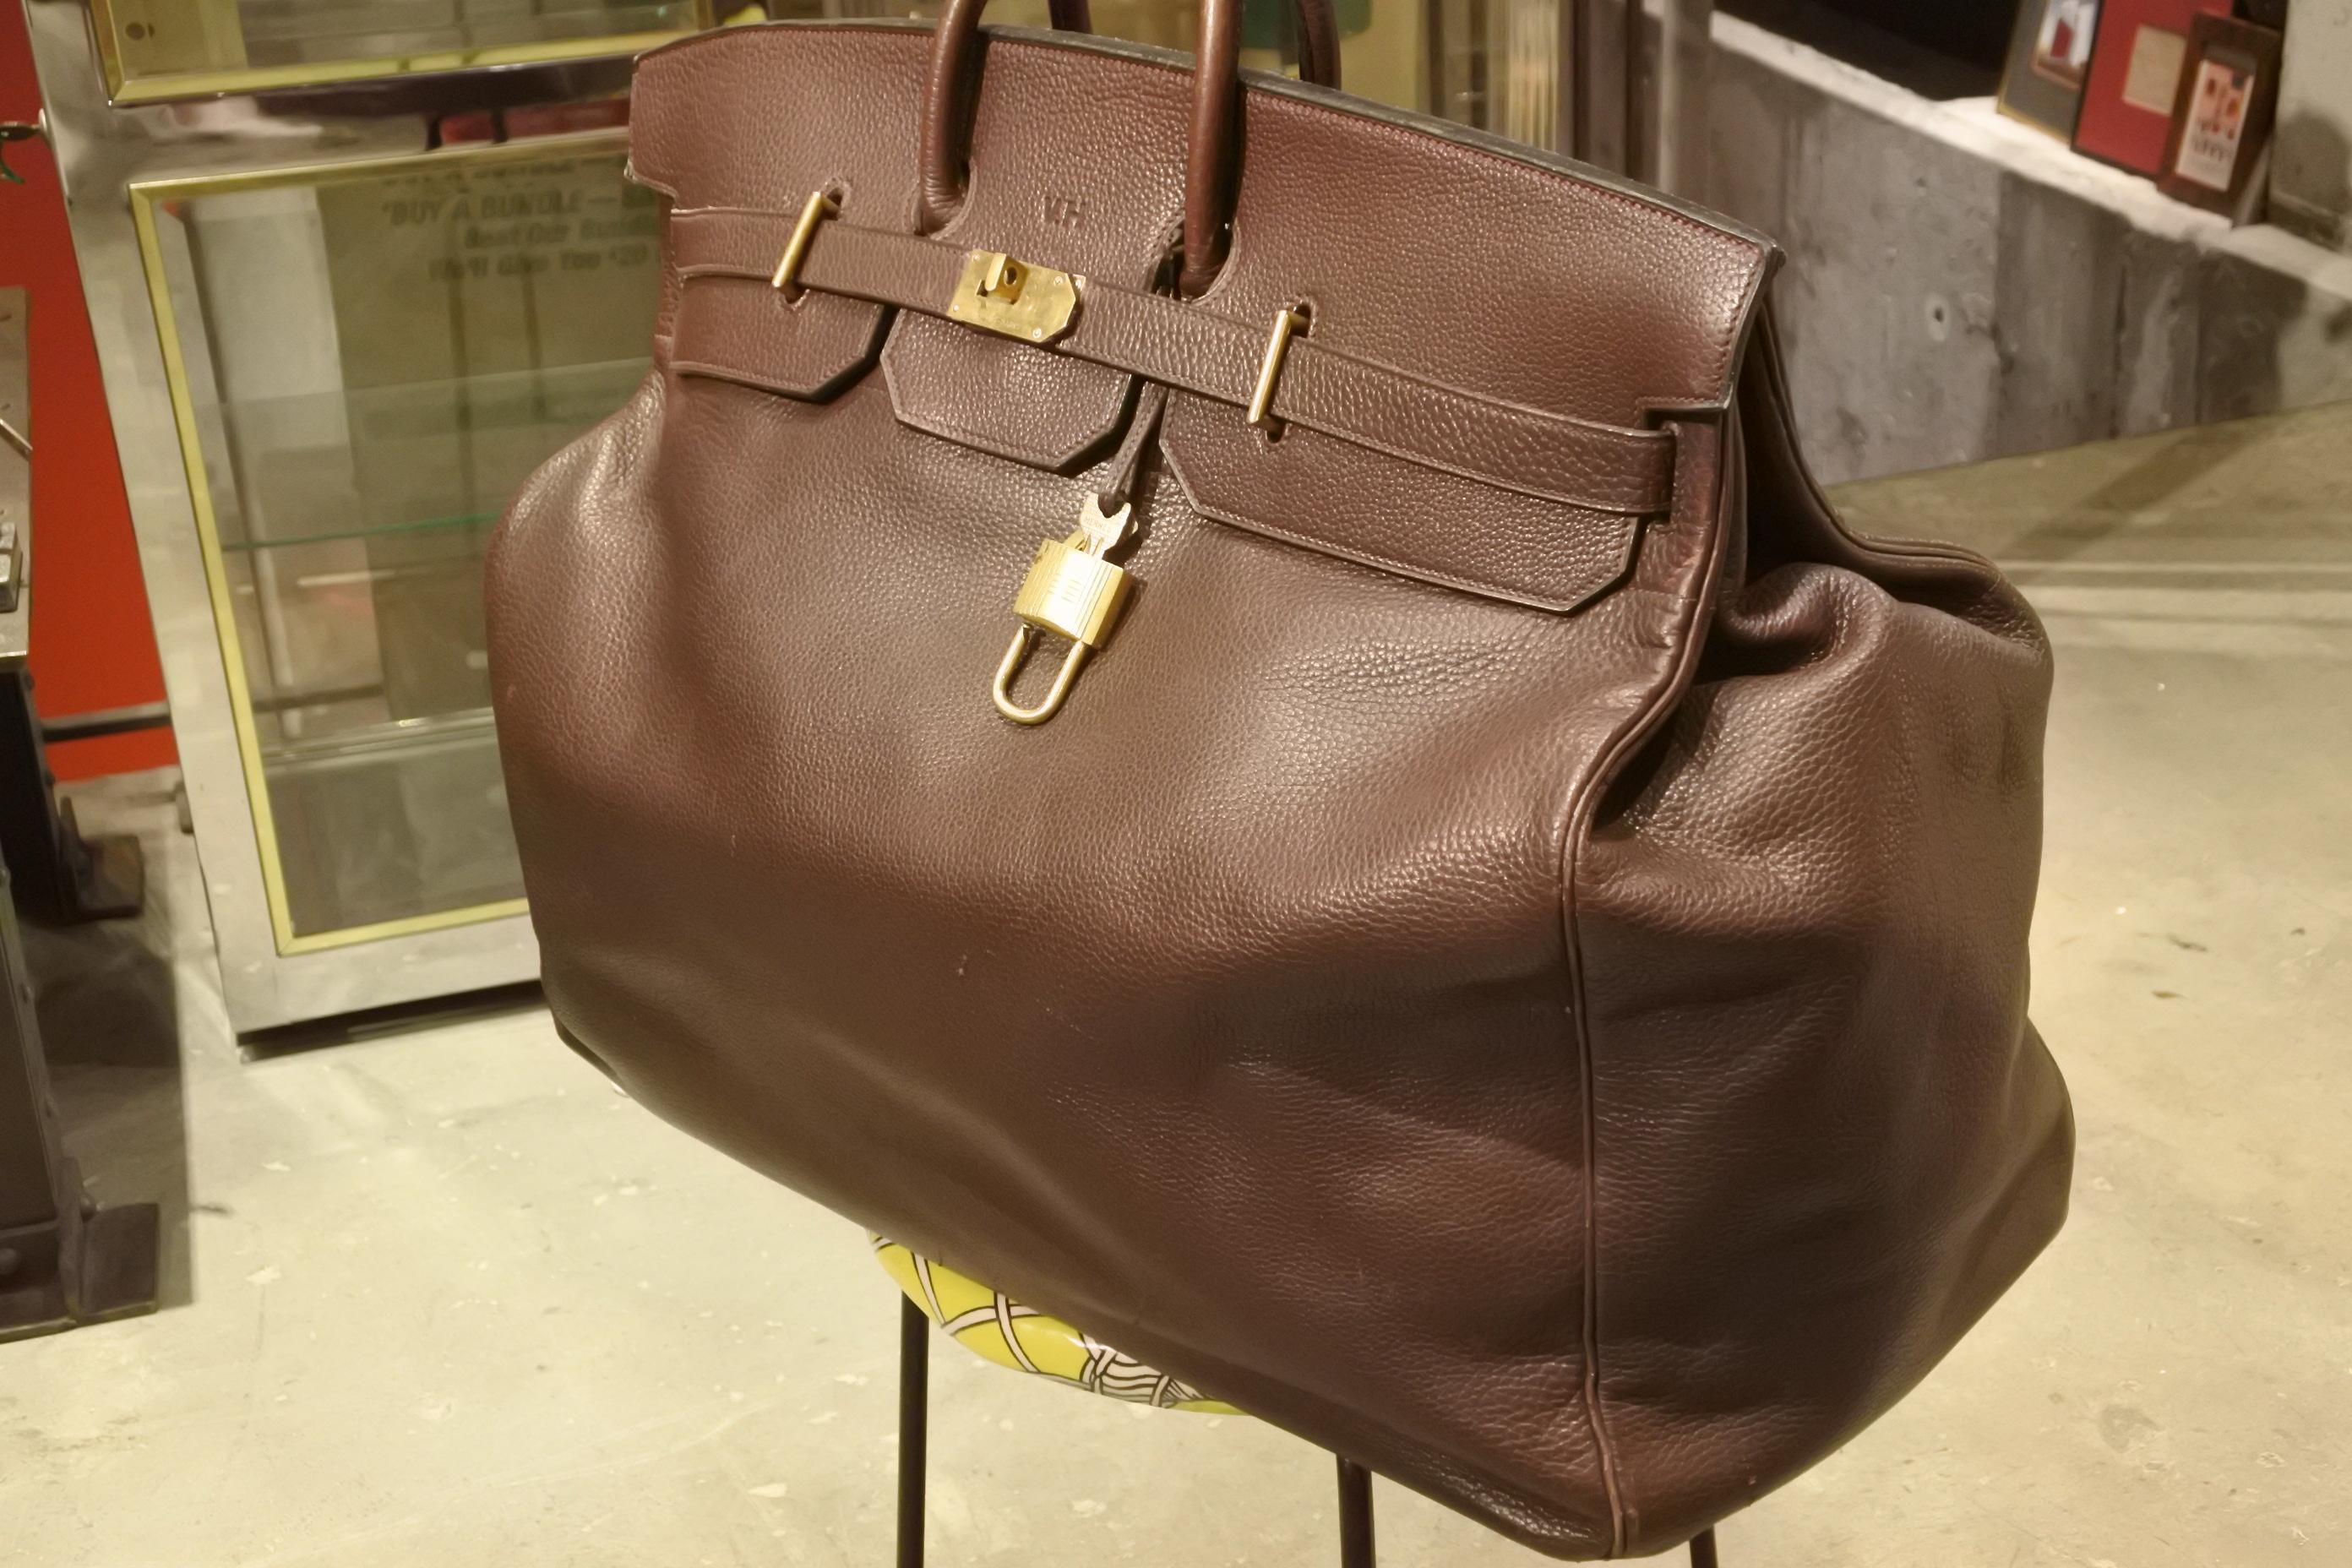 Incredible, rare, giant Hermès Haut à Courroies travel bag. In brown Togo leather. The 60cm is seldom found, and we almost never have an opportunity to get these bags online. Great condition, with some small nicks and scratches to the leather, but